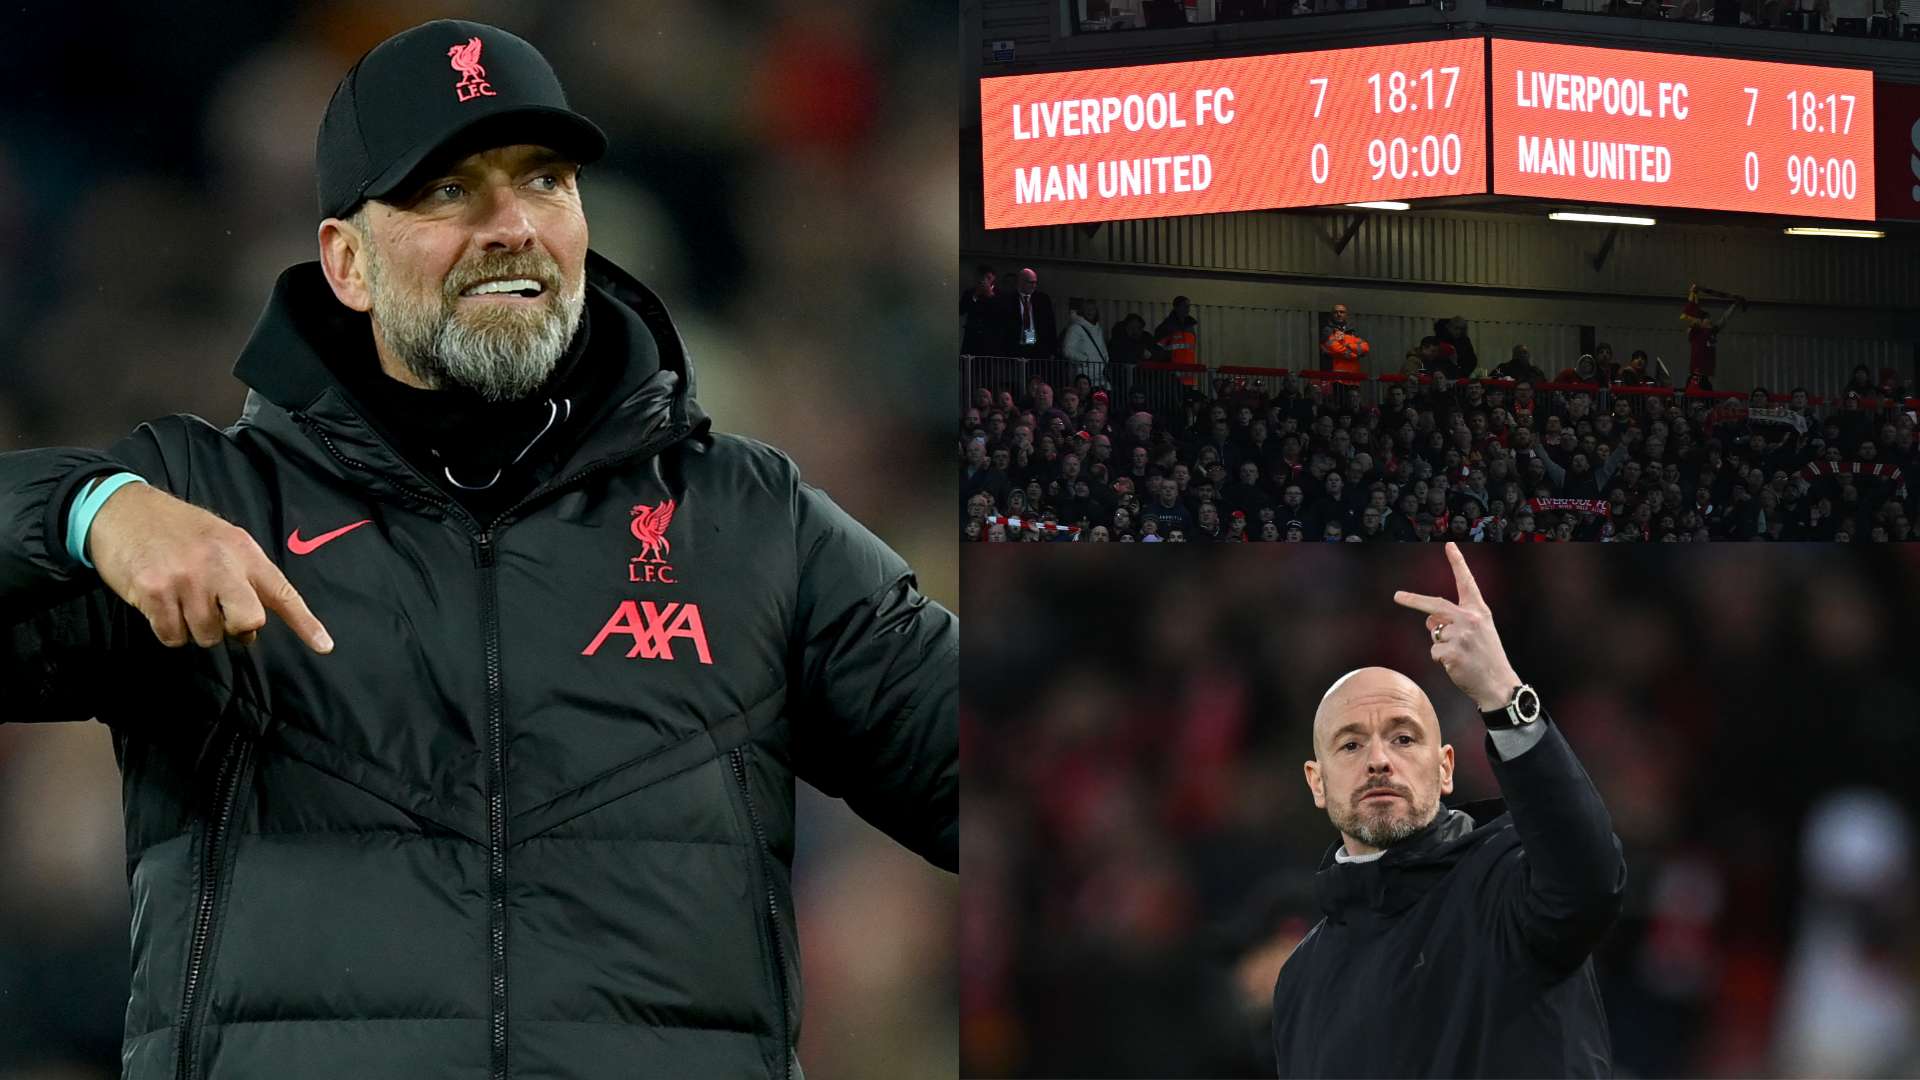 Liverpool Manchester United 7-0 2022-23